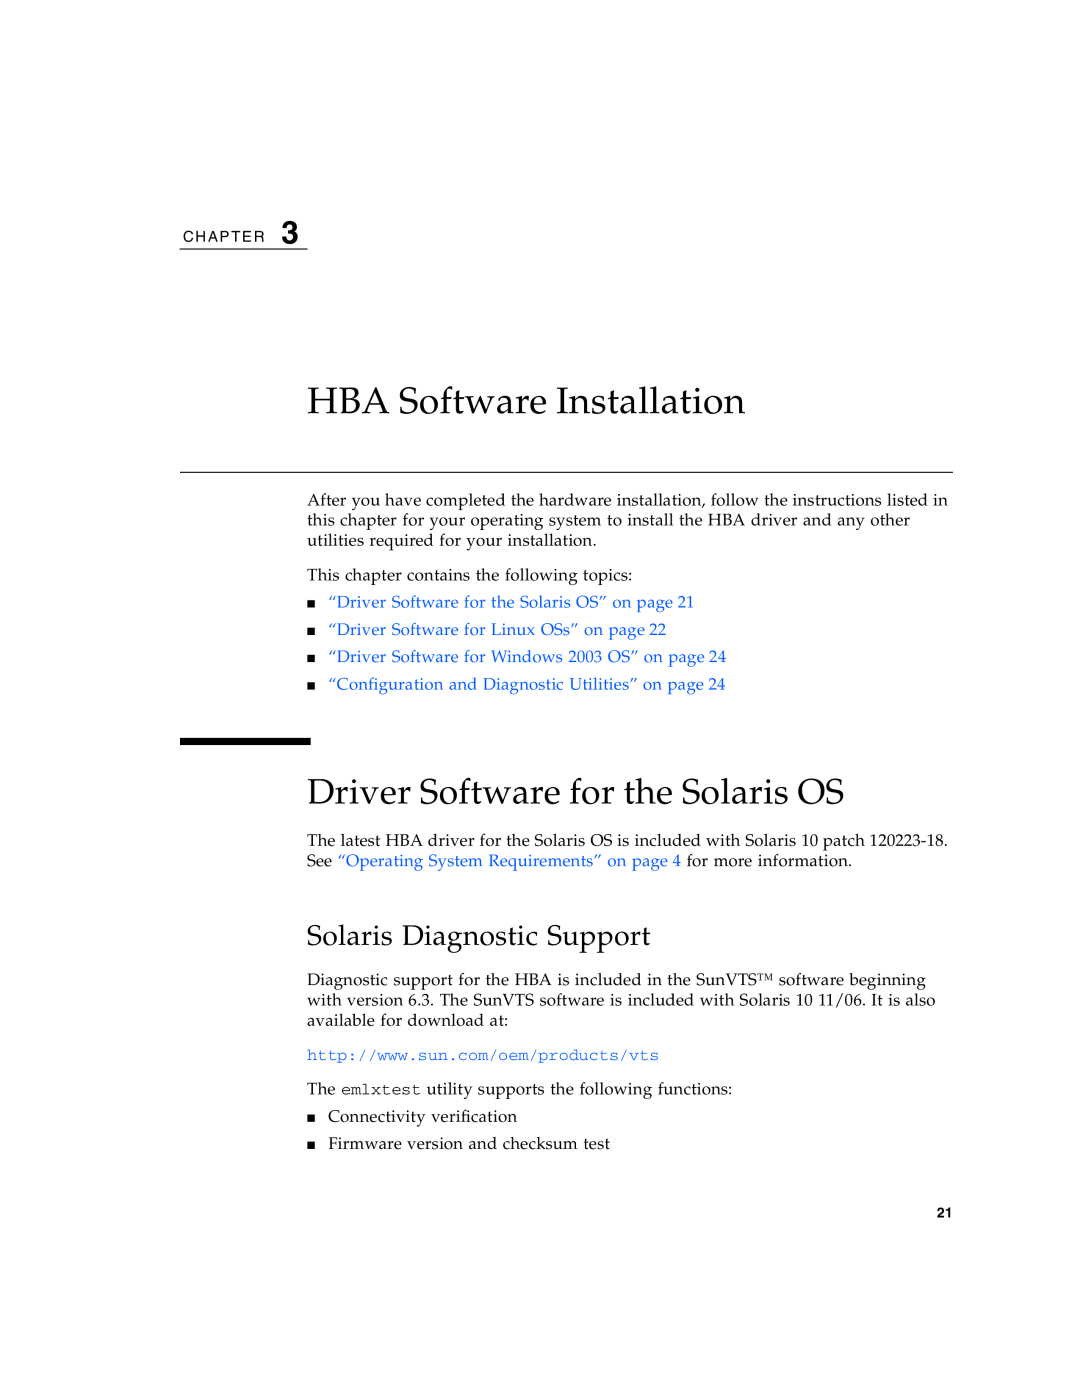 Sun Microsystems 2.0 manual HBA Software Installation, Driver Software for the Solaris OS, Solaris Diagnostic Support 